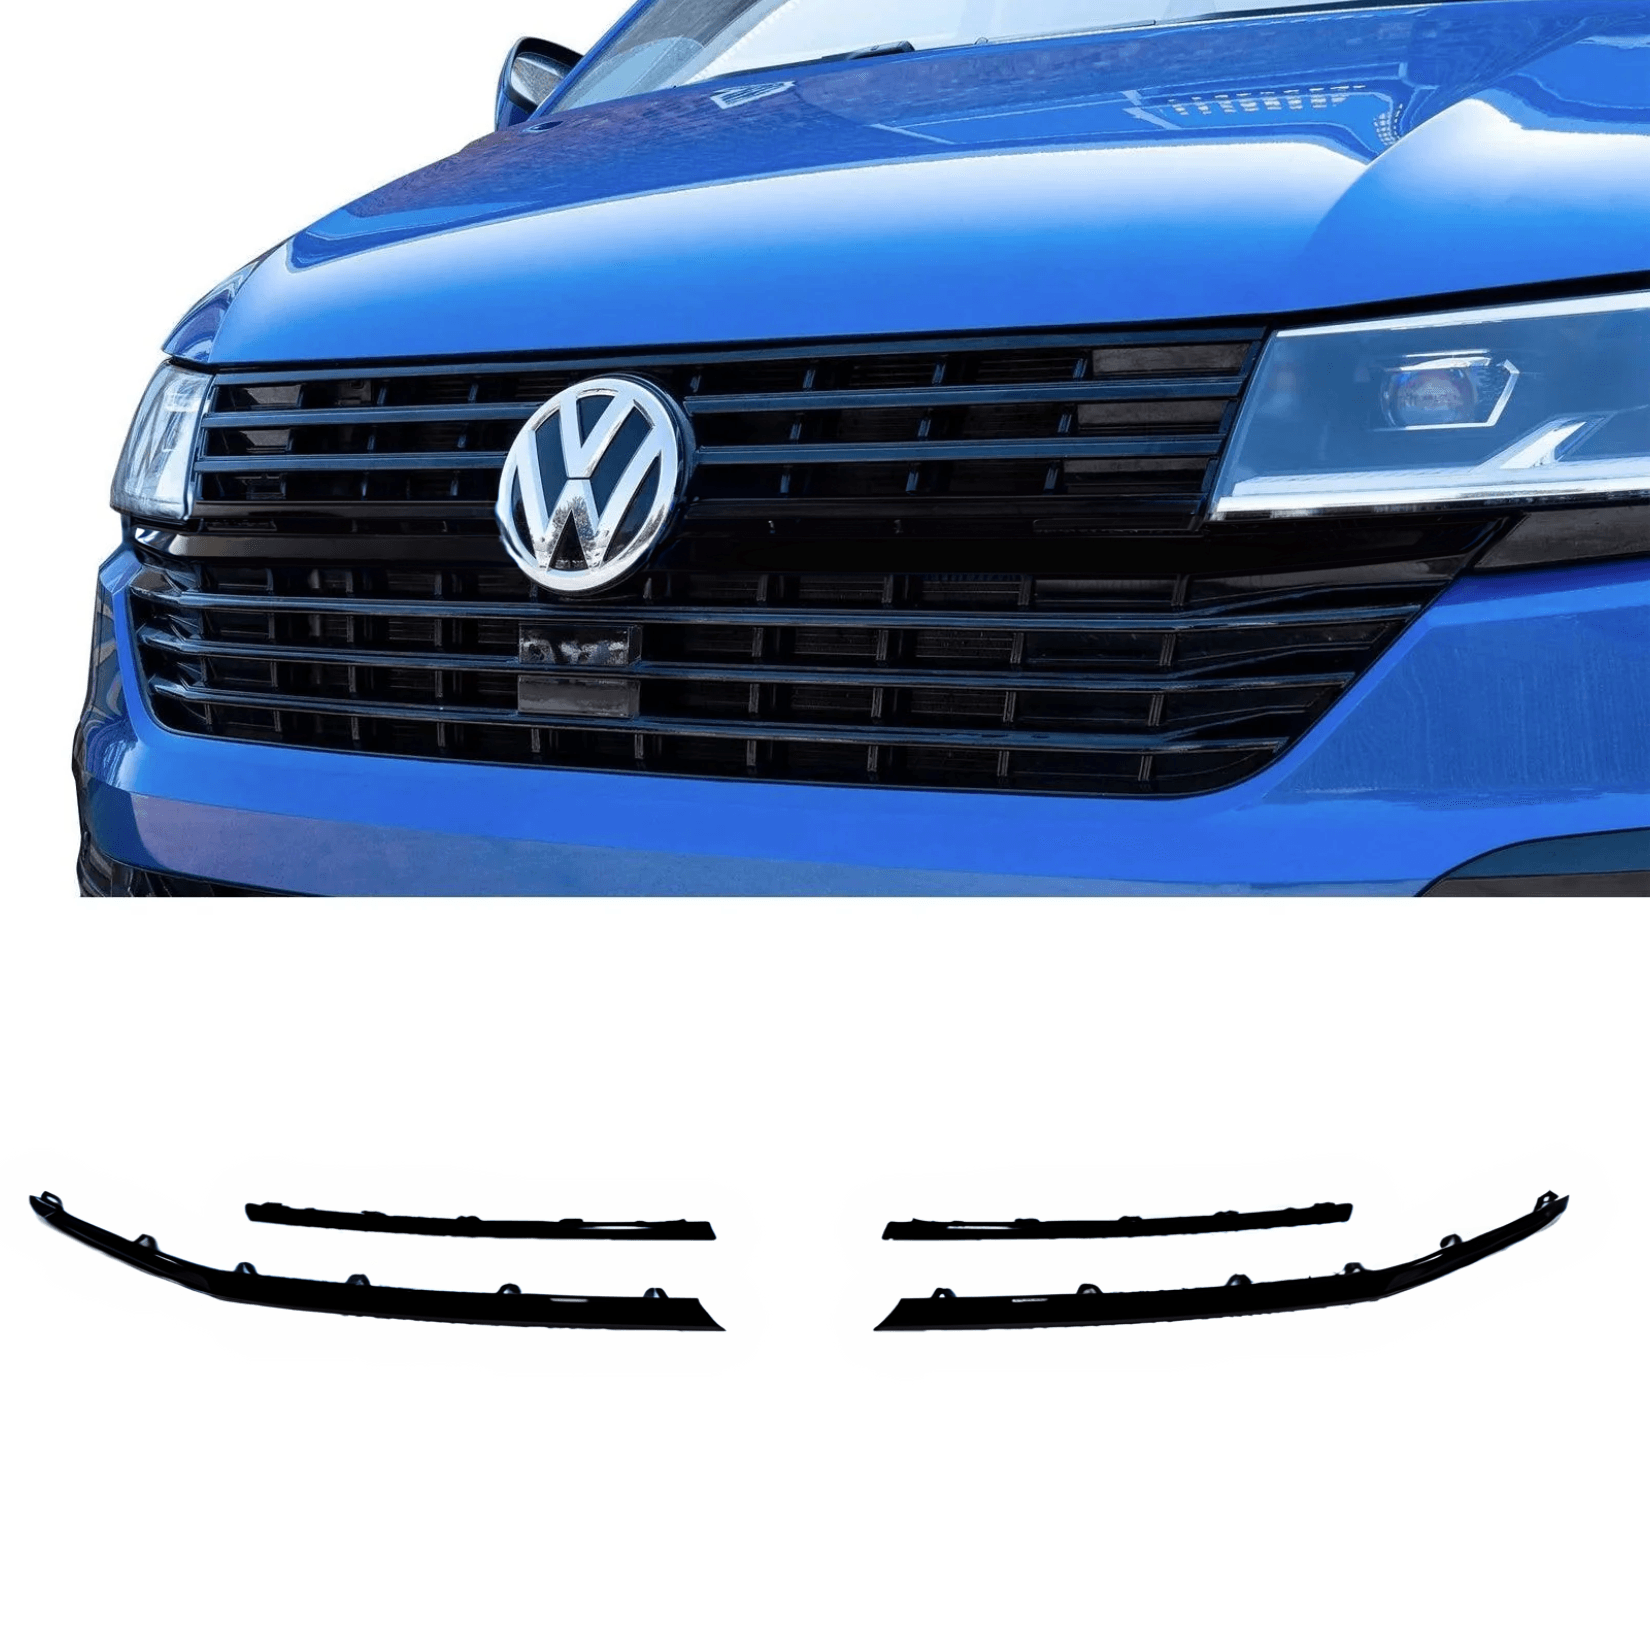 VW T6.1 TRANSPORTER FRONT RADIATOR BADGED GRILLE UPPER LOWER CLIP IN TRIM CHOOSE COLOUR - Storm Xccessories